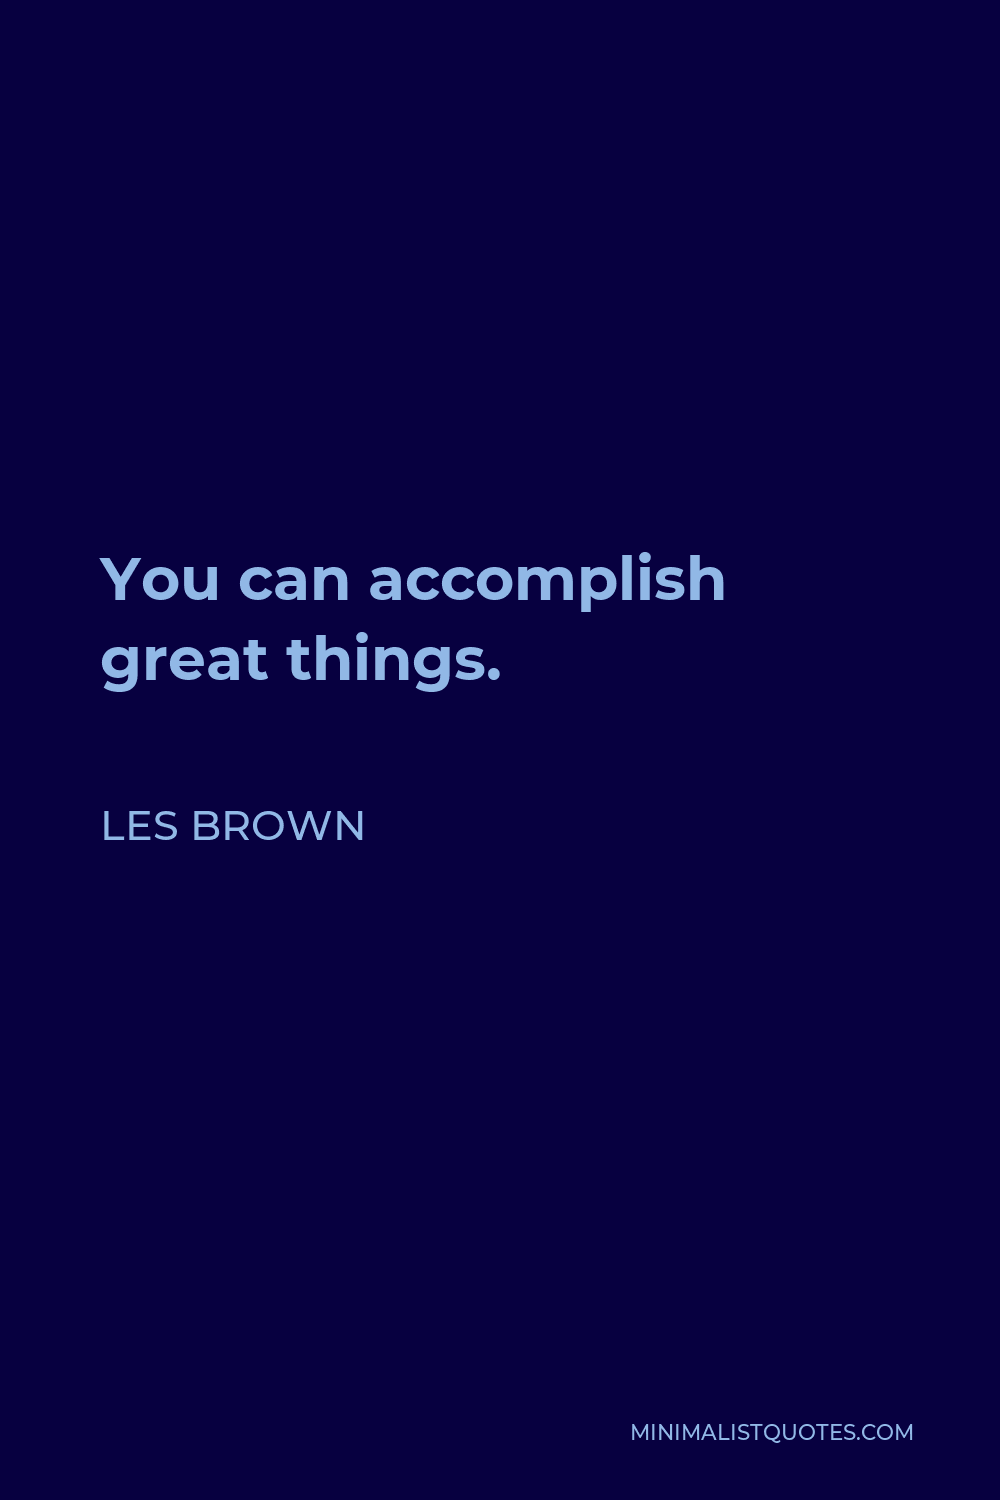 Les Brown Quote - You can accomplish great things.